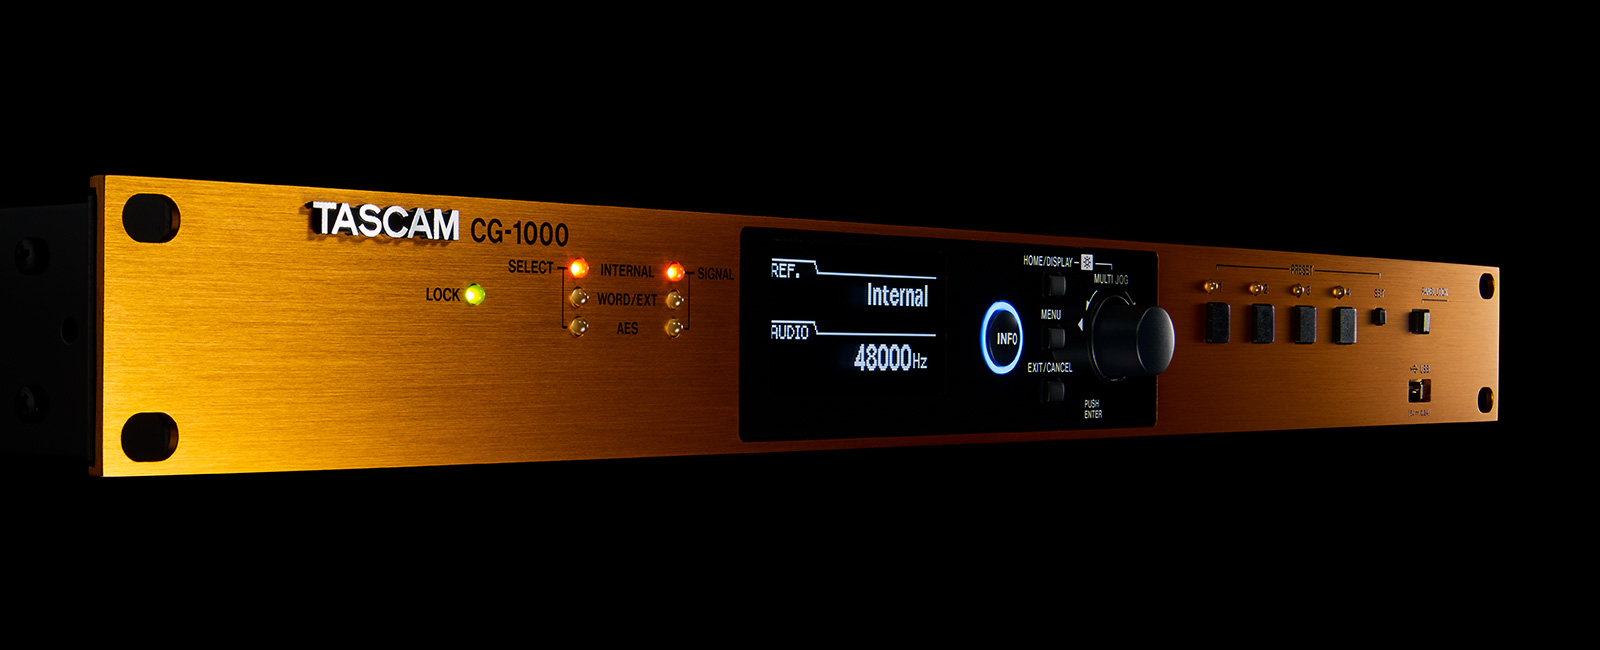 Or later Monopoly hair CG-1000 | OVERVIEW | TASCAM - United States